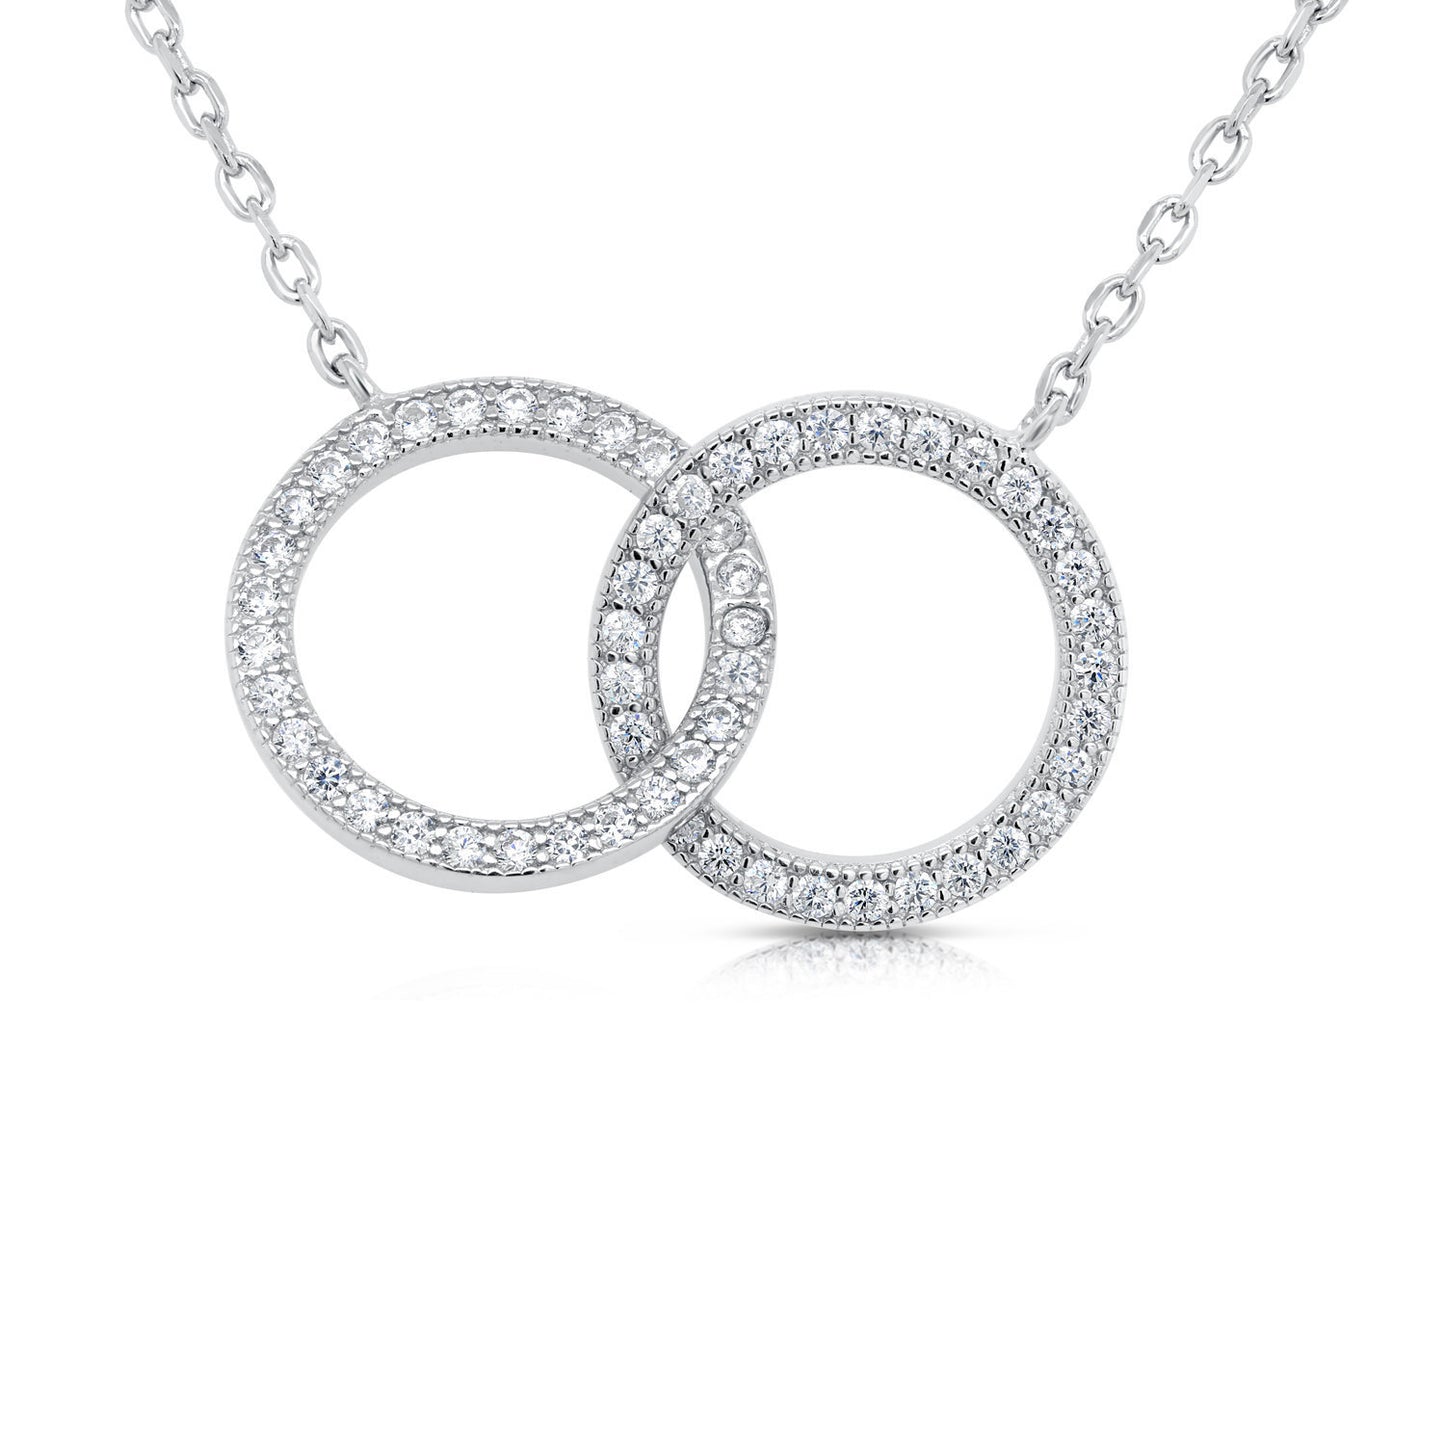 Sterling Silver Double Ring Necklace, 18 Inch